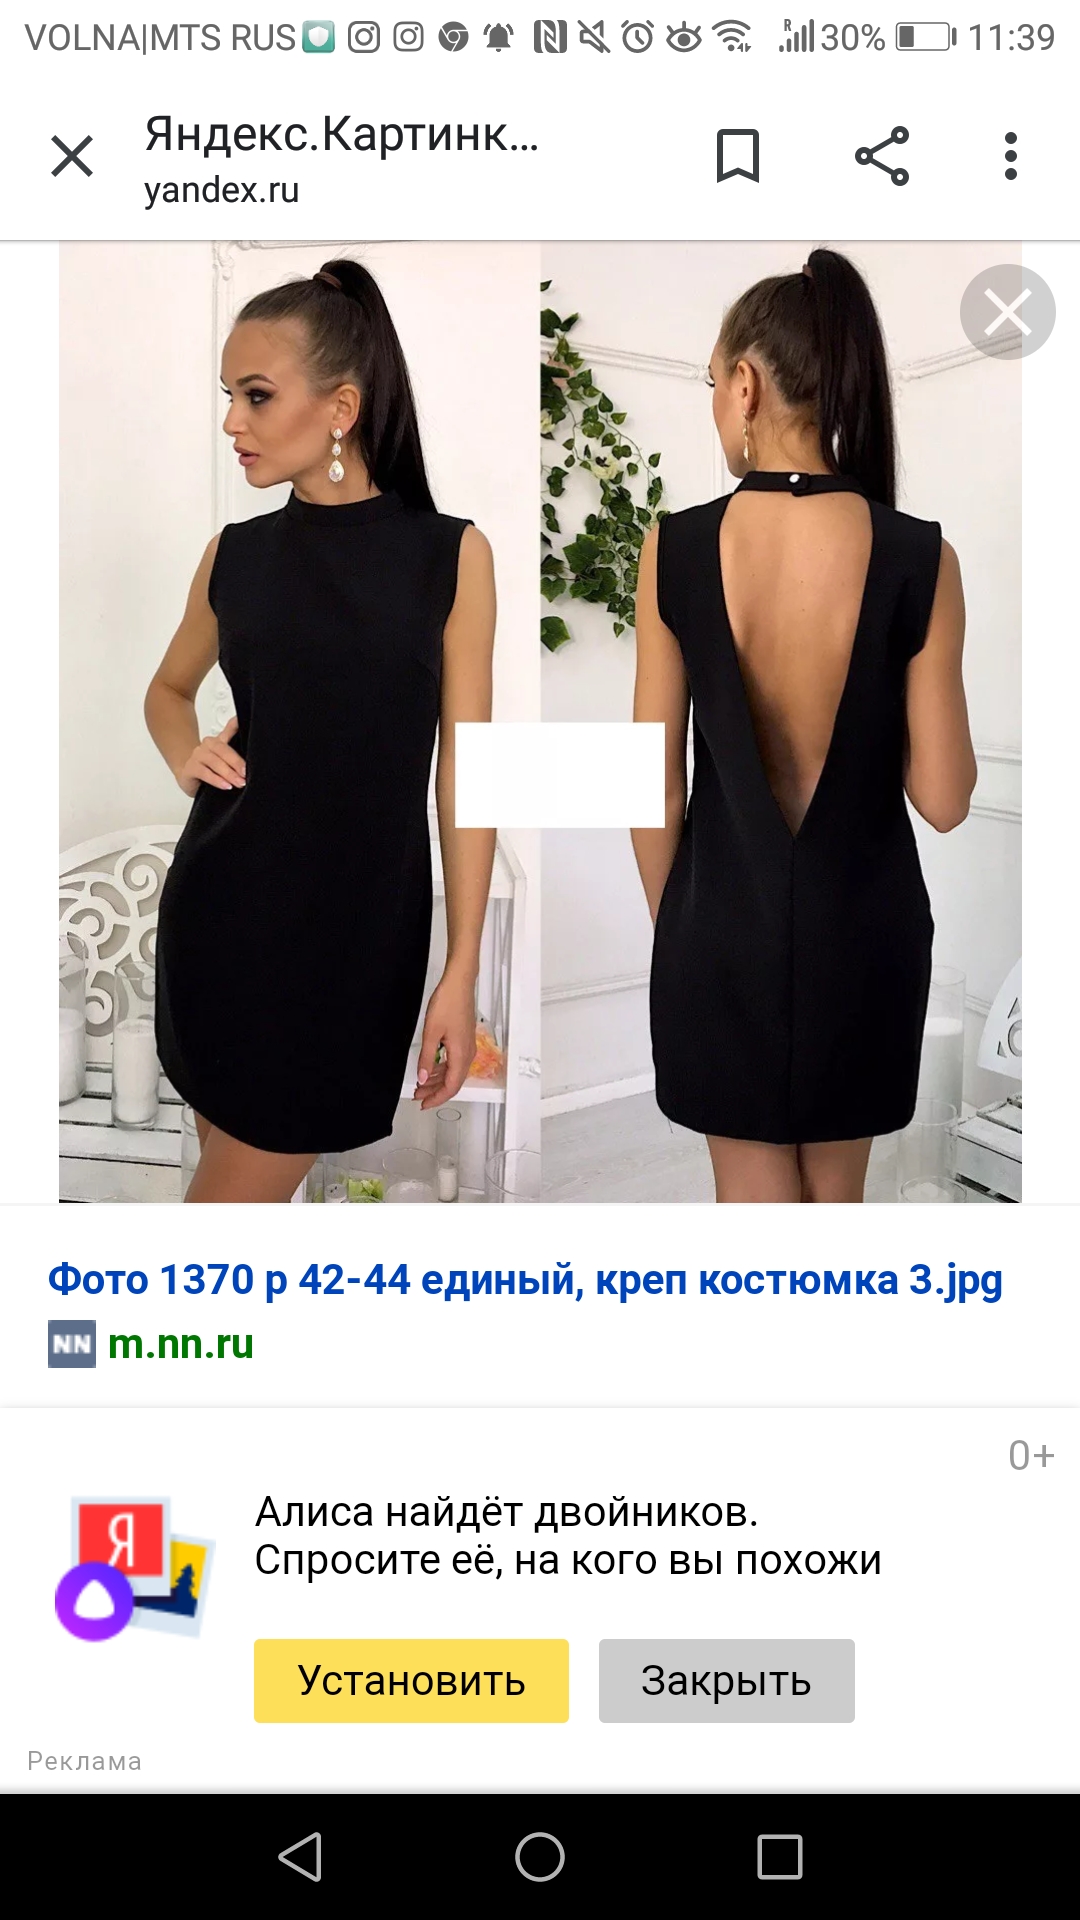 <p>We are looking for a supplier of dresses from Italy, Switzerland, Spain, USA. Interested in branded and elegant models. We have our own online store. We will work on a dropshipping system.</p>

<p>(translated from russian)</p>